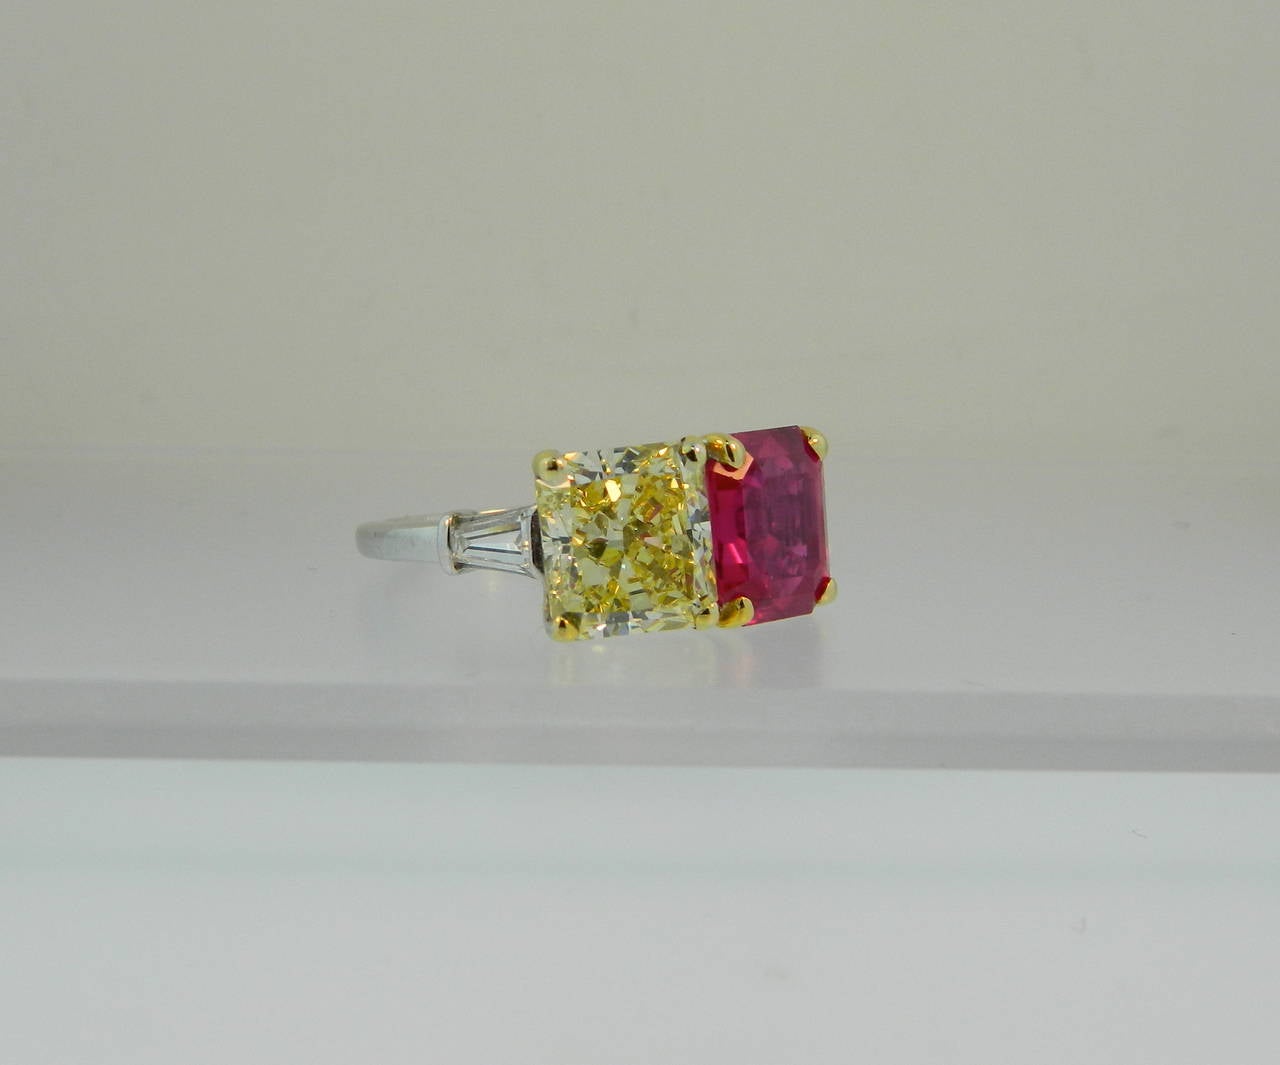 A stunning Platinum, SSEF certed, 3.75ct unheated octagonal step cut Burma ruby and GIA certed 3.26ct natural fancy yellow radiant cut diamond twin ring by Bulgari.